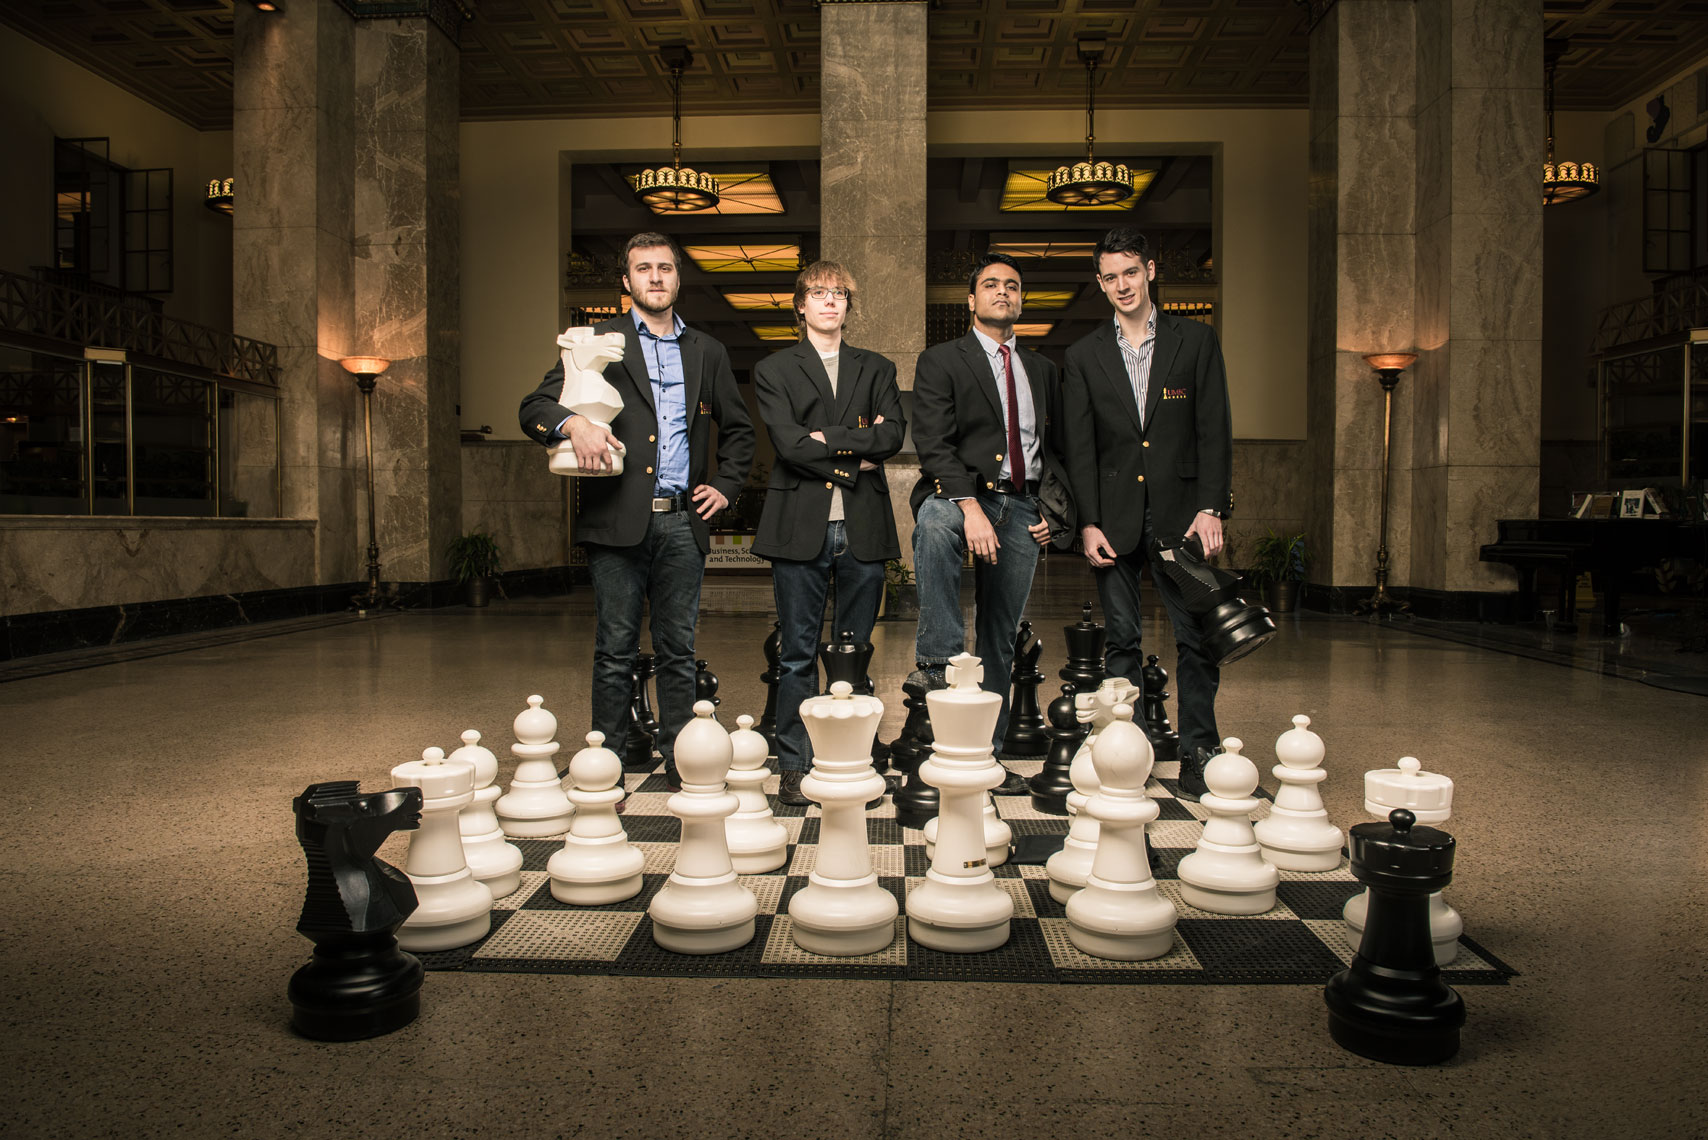 The UMBC Chess Team standing with a giant chessboard